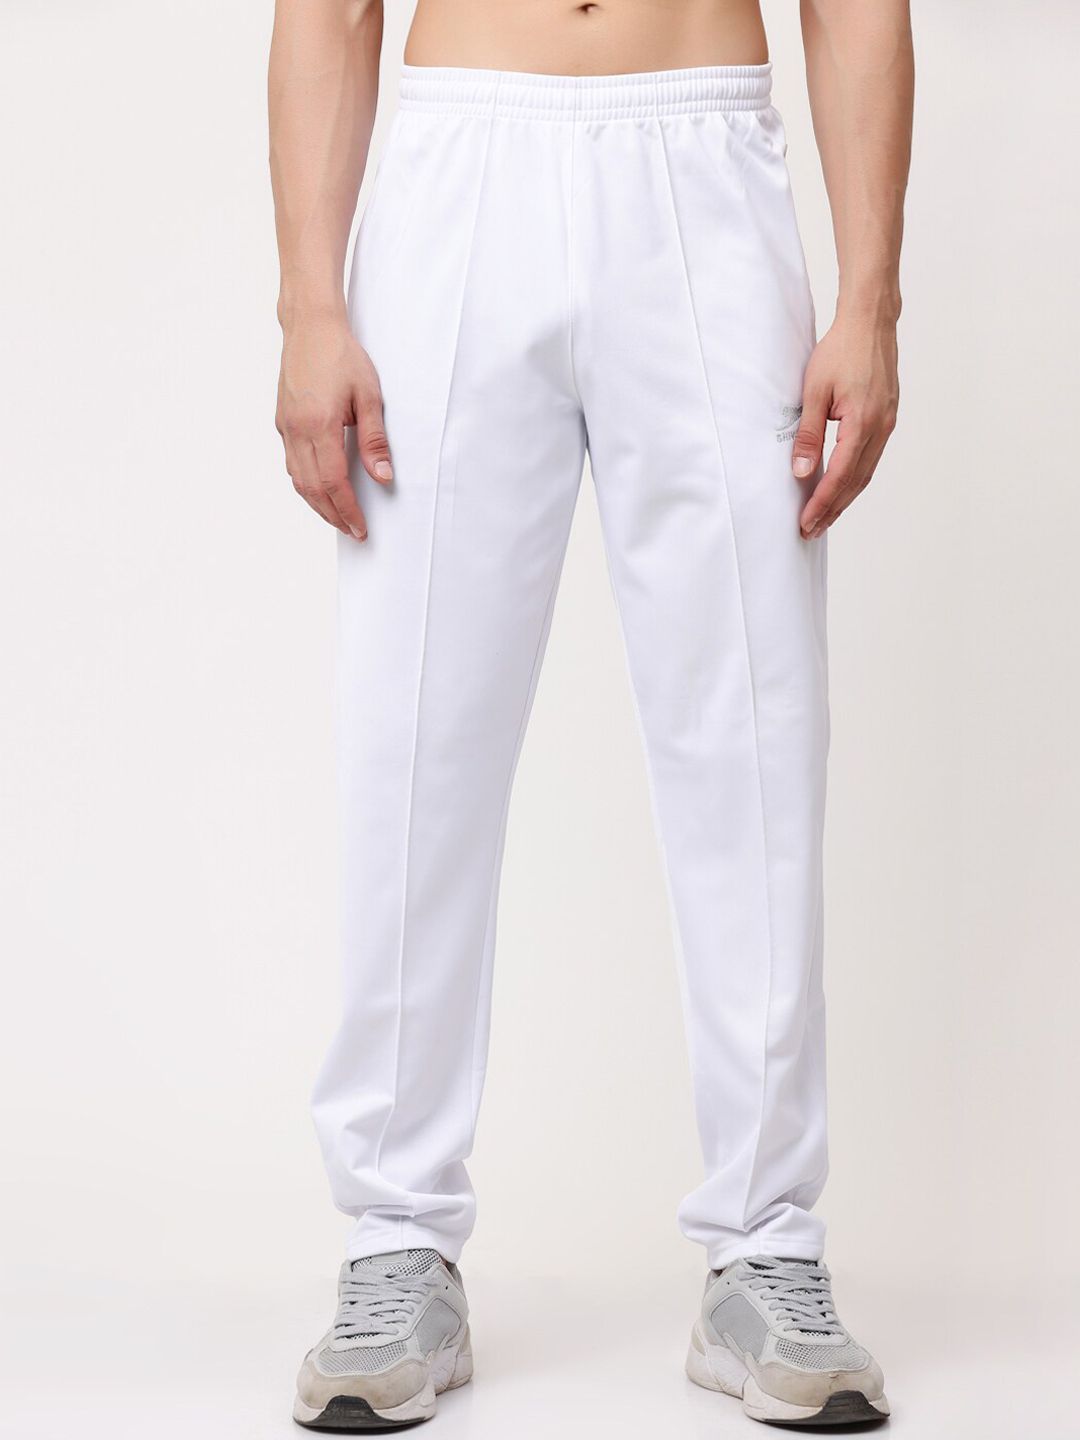 Buy Shiv Naresh SNTS Micro Asian Games Polyester Track Suit, Men's (White)  online | Looksgud.in